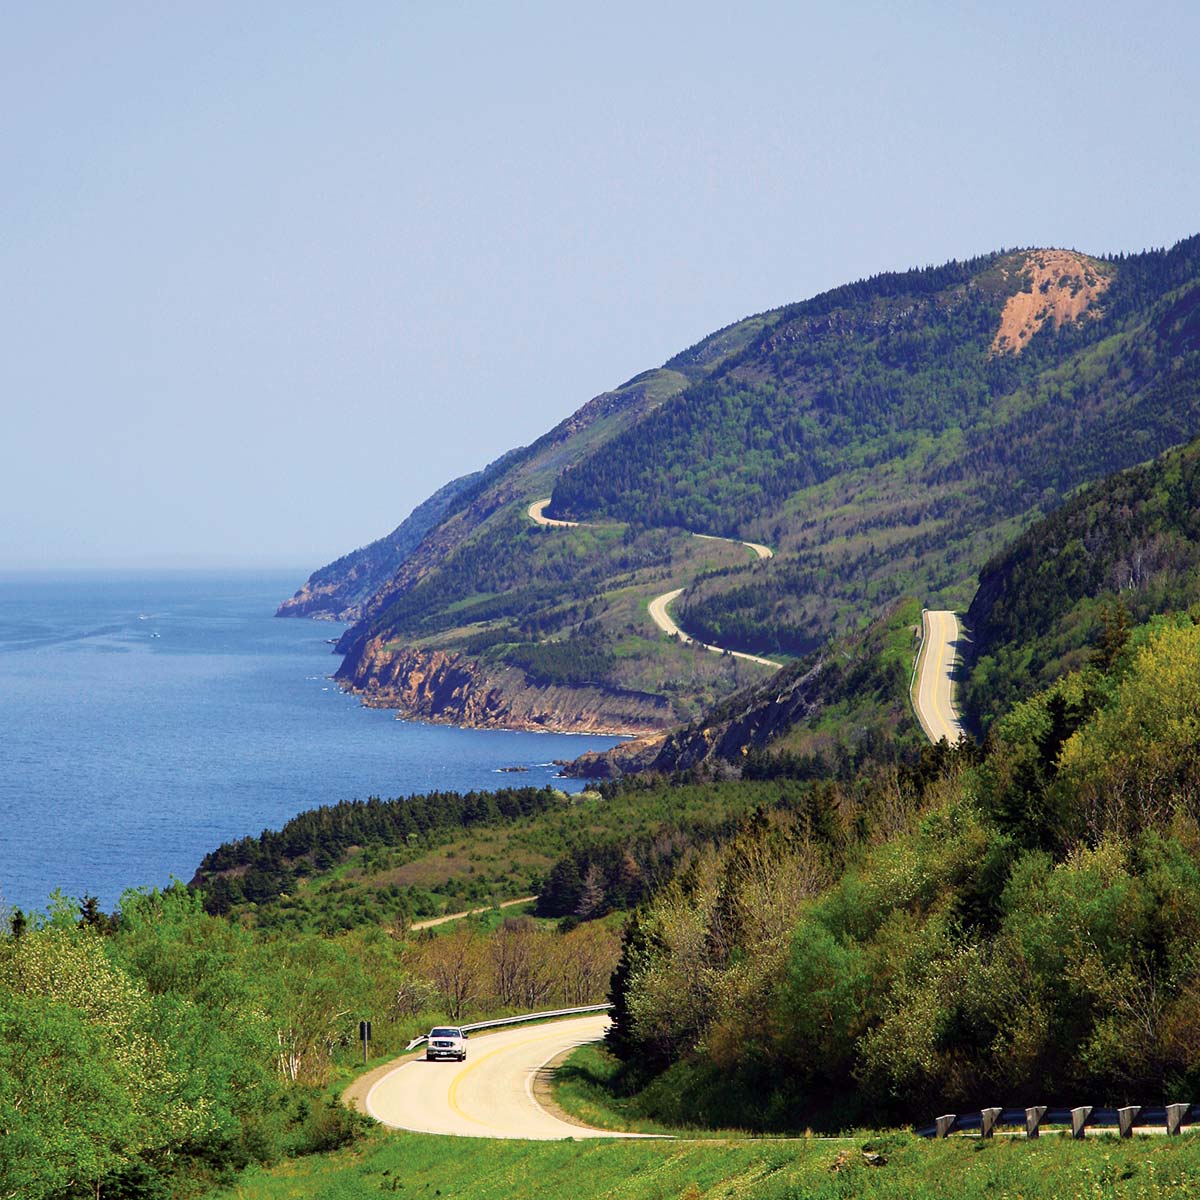 A car traverses the windy coastal Cabot Trail highway in Cape Breton Highlands National Park.